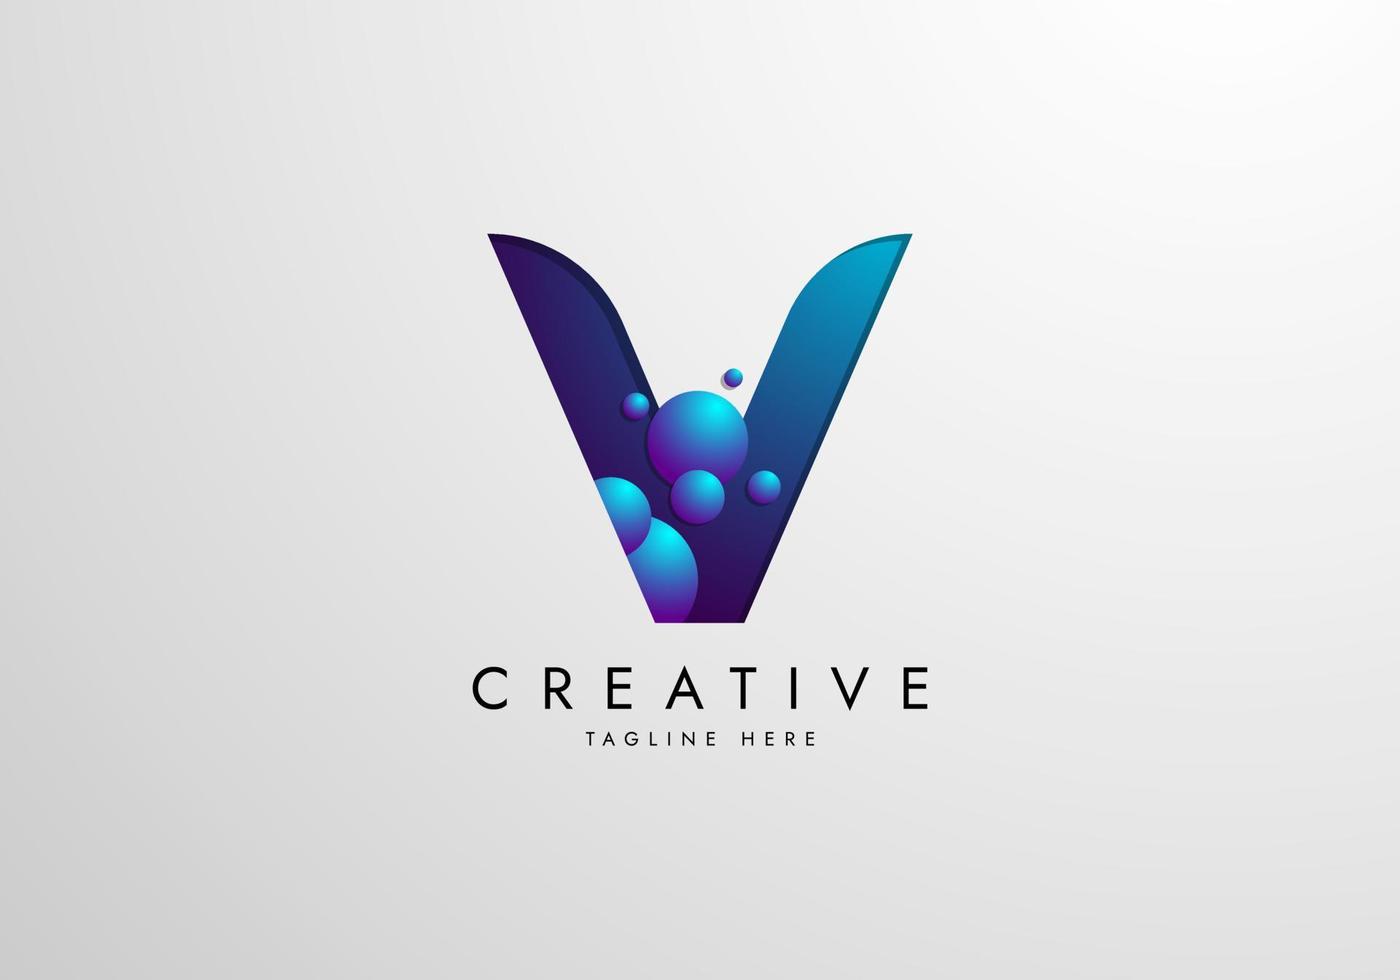 Letter V logo combined with gradient colored bubbles, logo Design Template vector